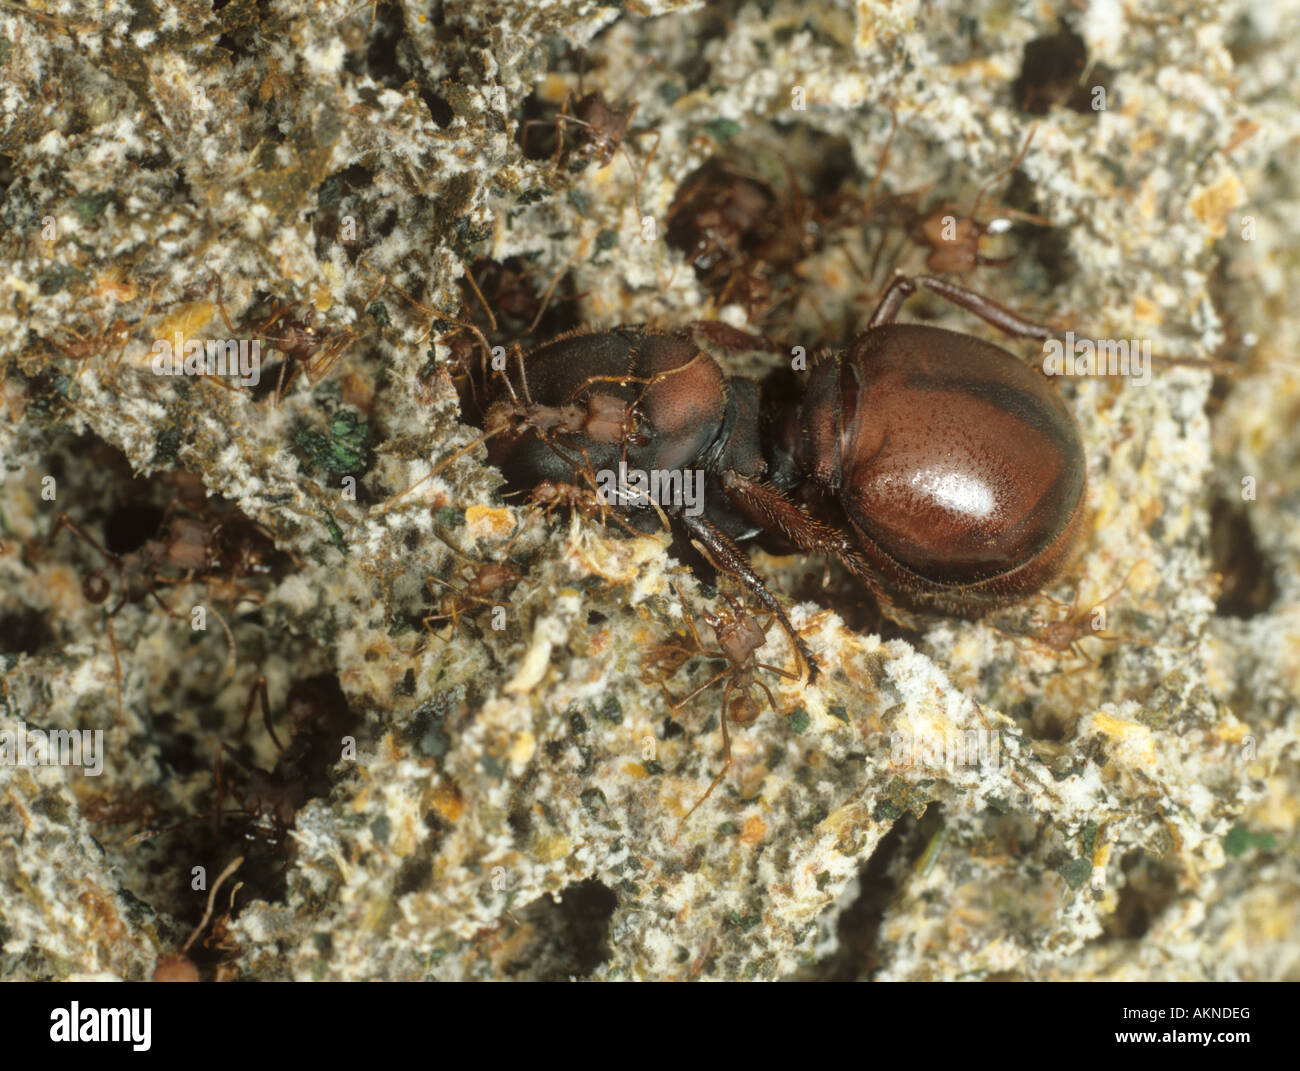 Leaf cutter ant Atta laevigata queen with workers and soldiers on their garden of fungus Stock Photo